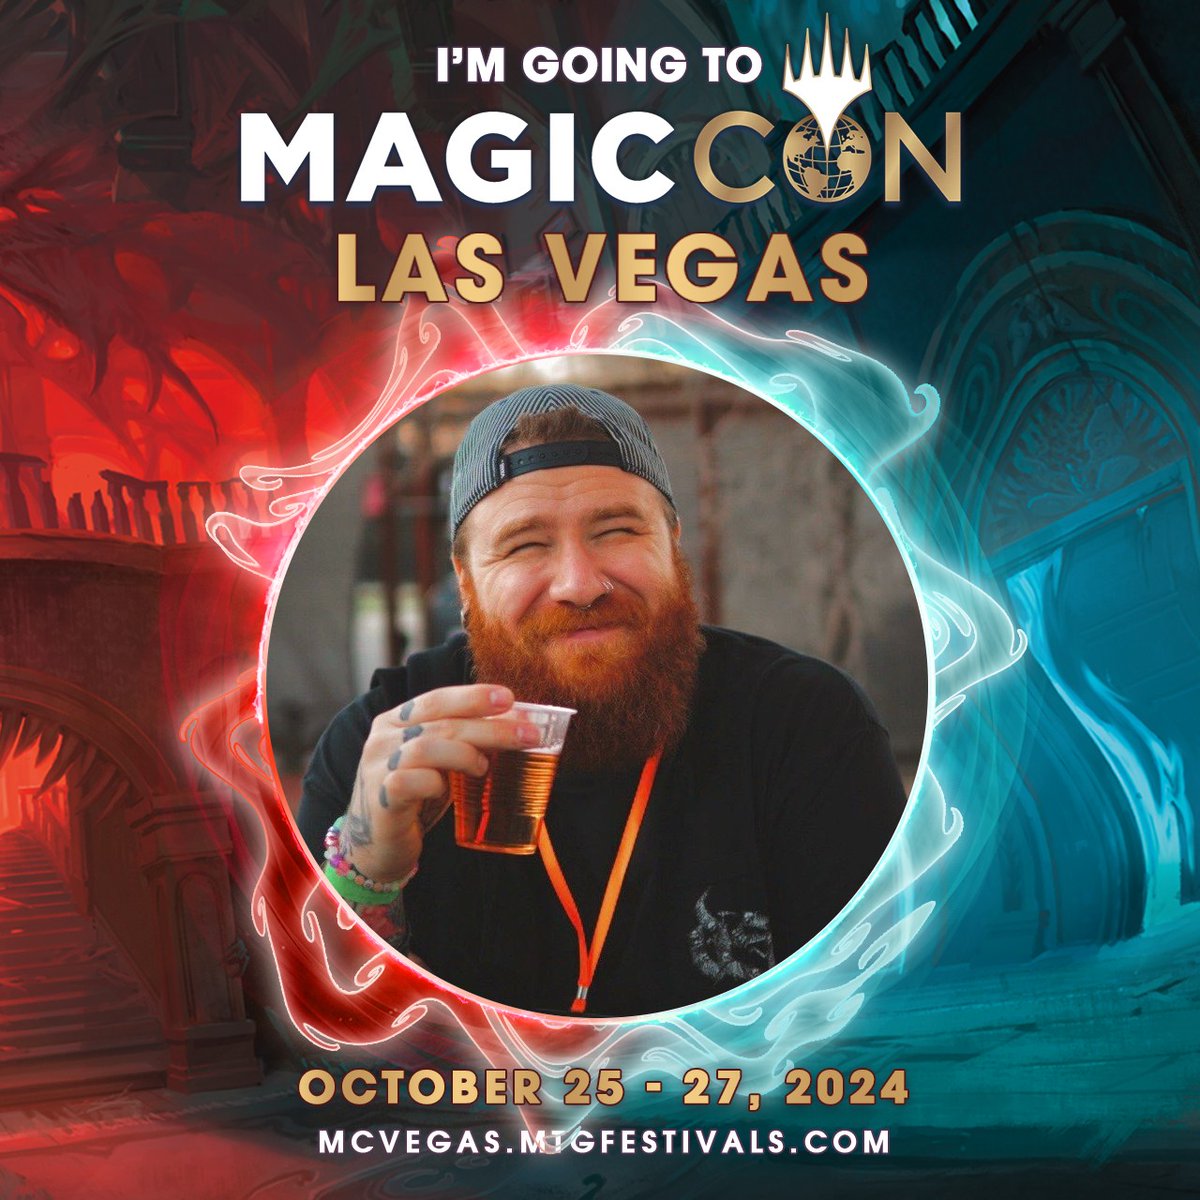 Ill be going to MagicCon Las Vegas! You should too! grab your tickets here:
spr.ly/MCVegasCreator

Come throw down on some commander >:)

#mcvegas
@wizards_magic